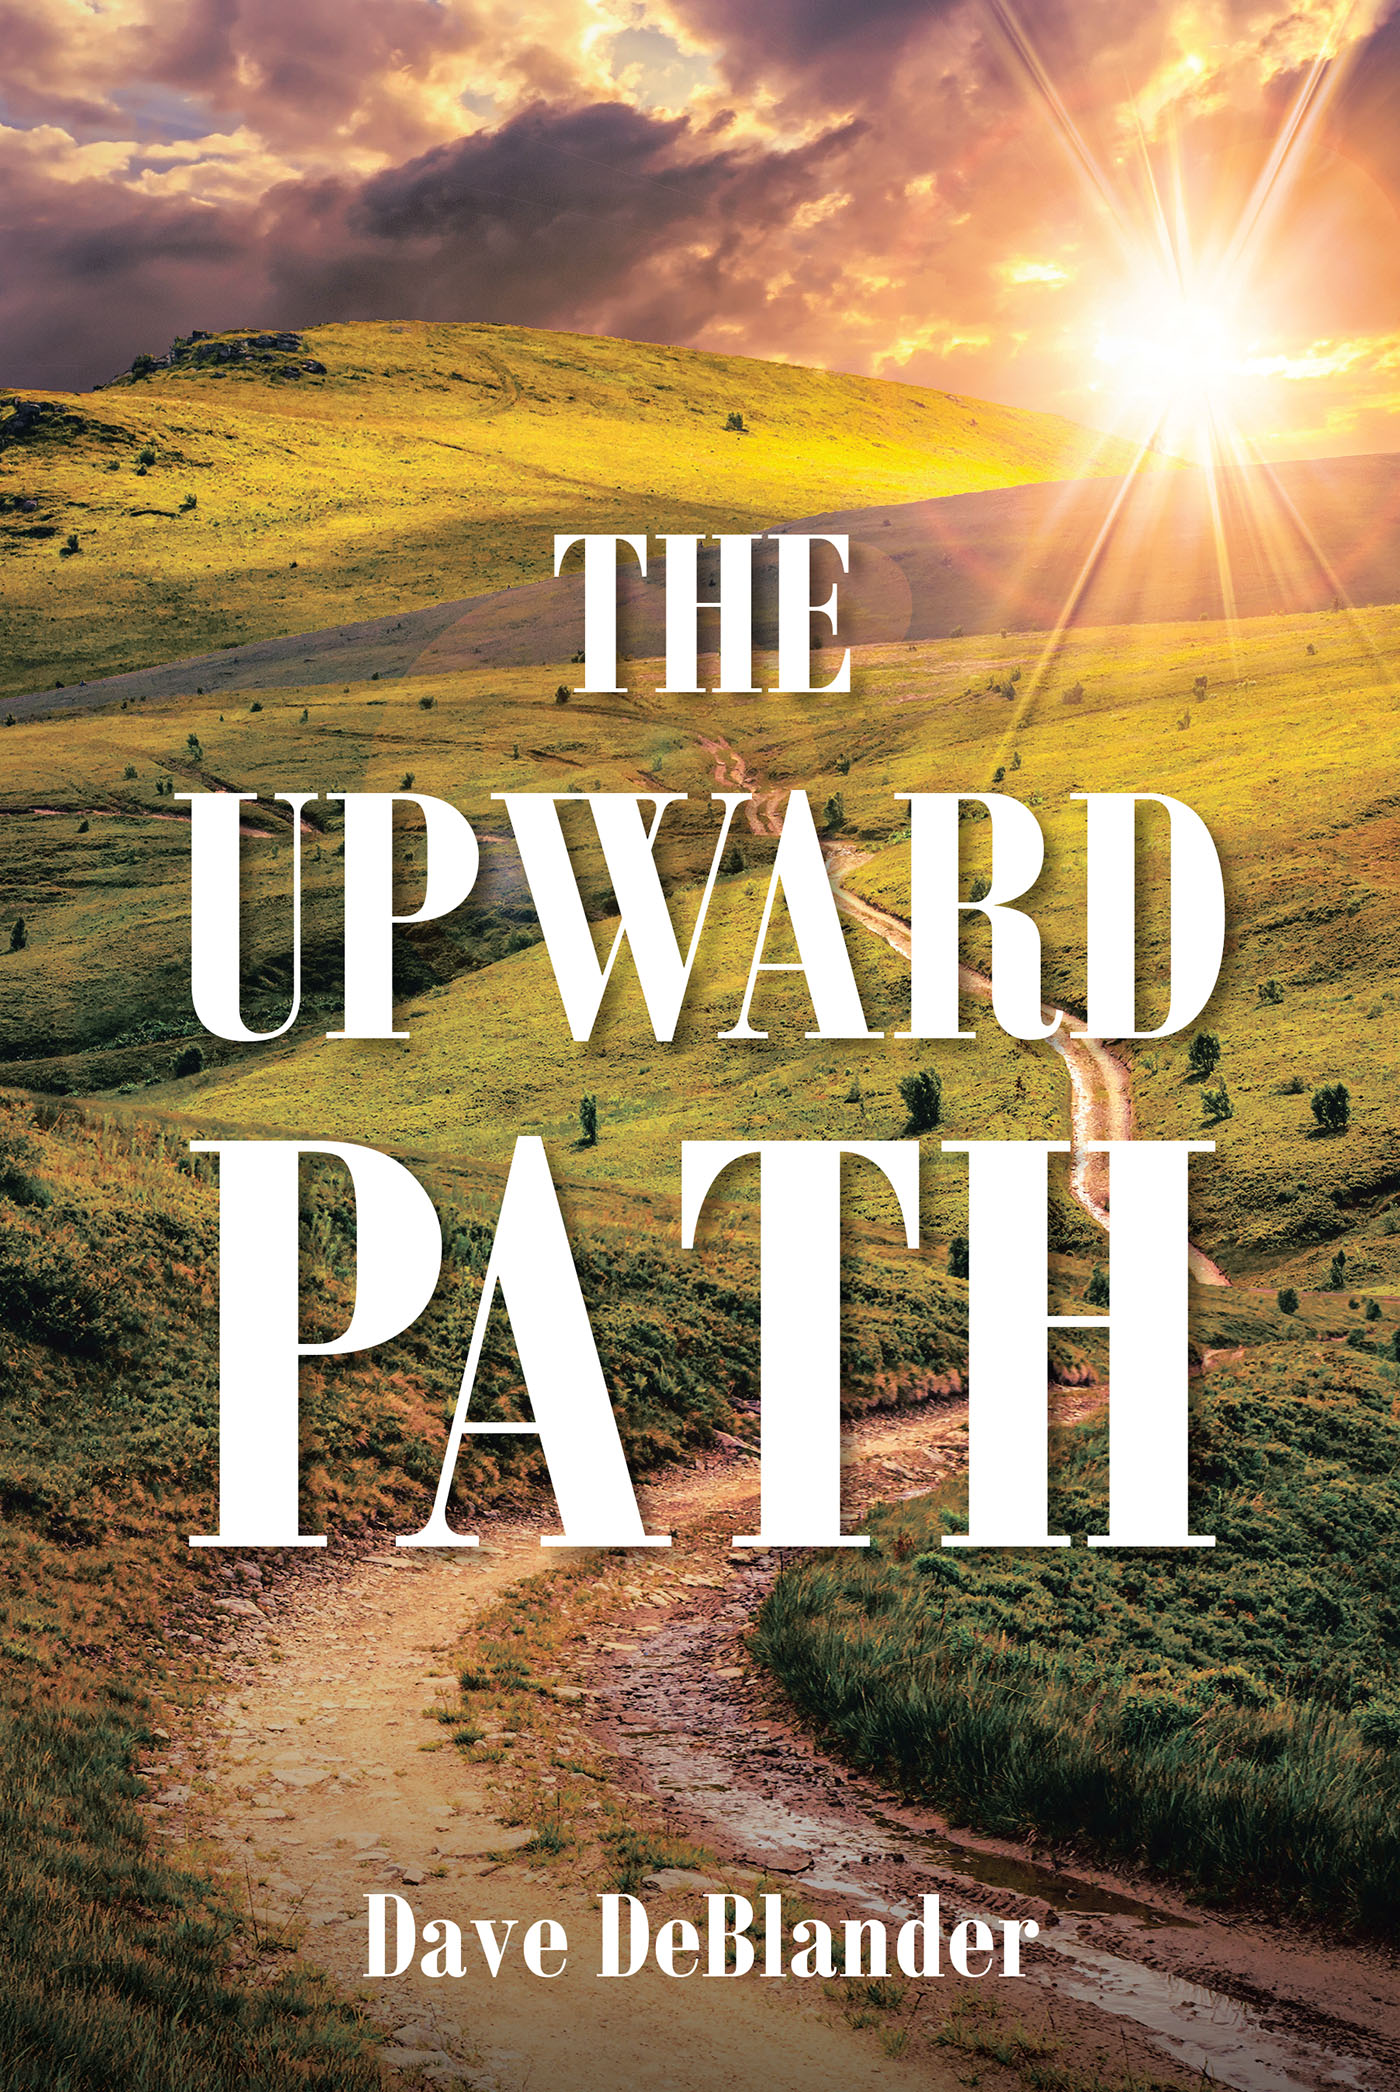 Dave DeBlander’s Newly Released “The Upward Path” is an Empowering Message of the Need to be Aware of One’s Spiritual Path